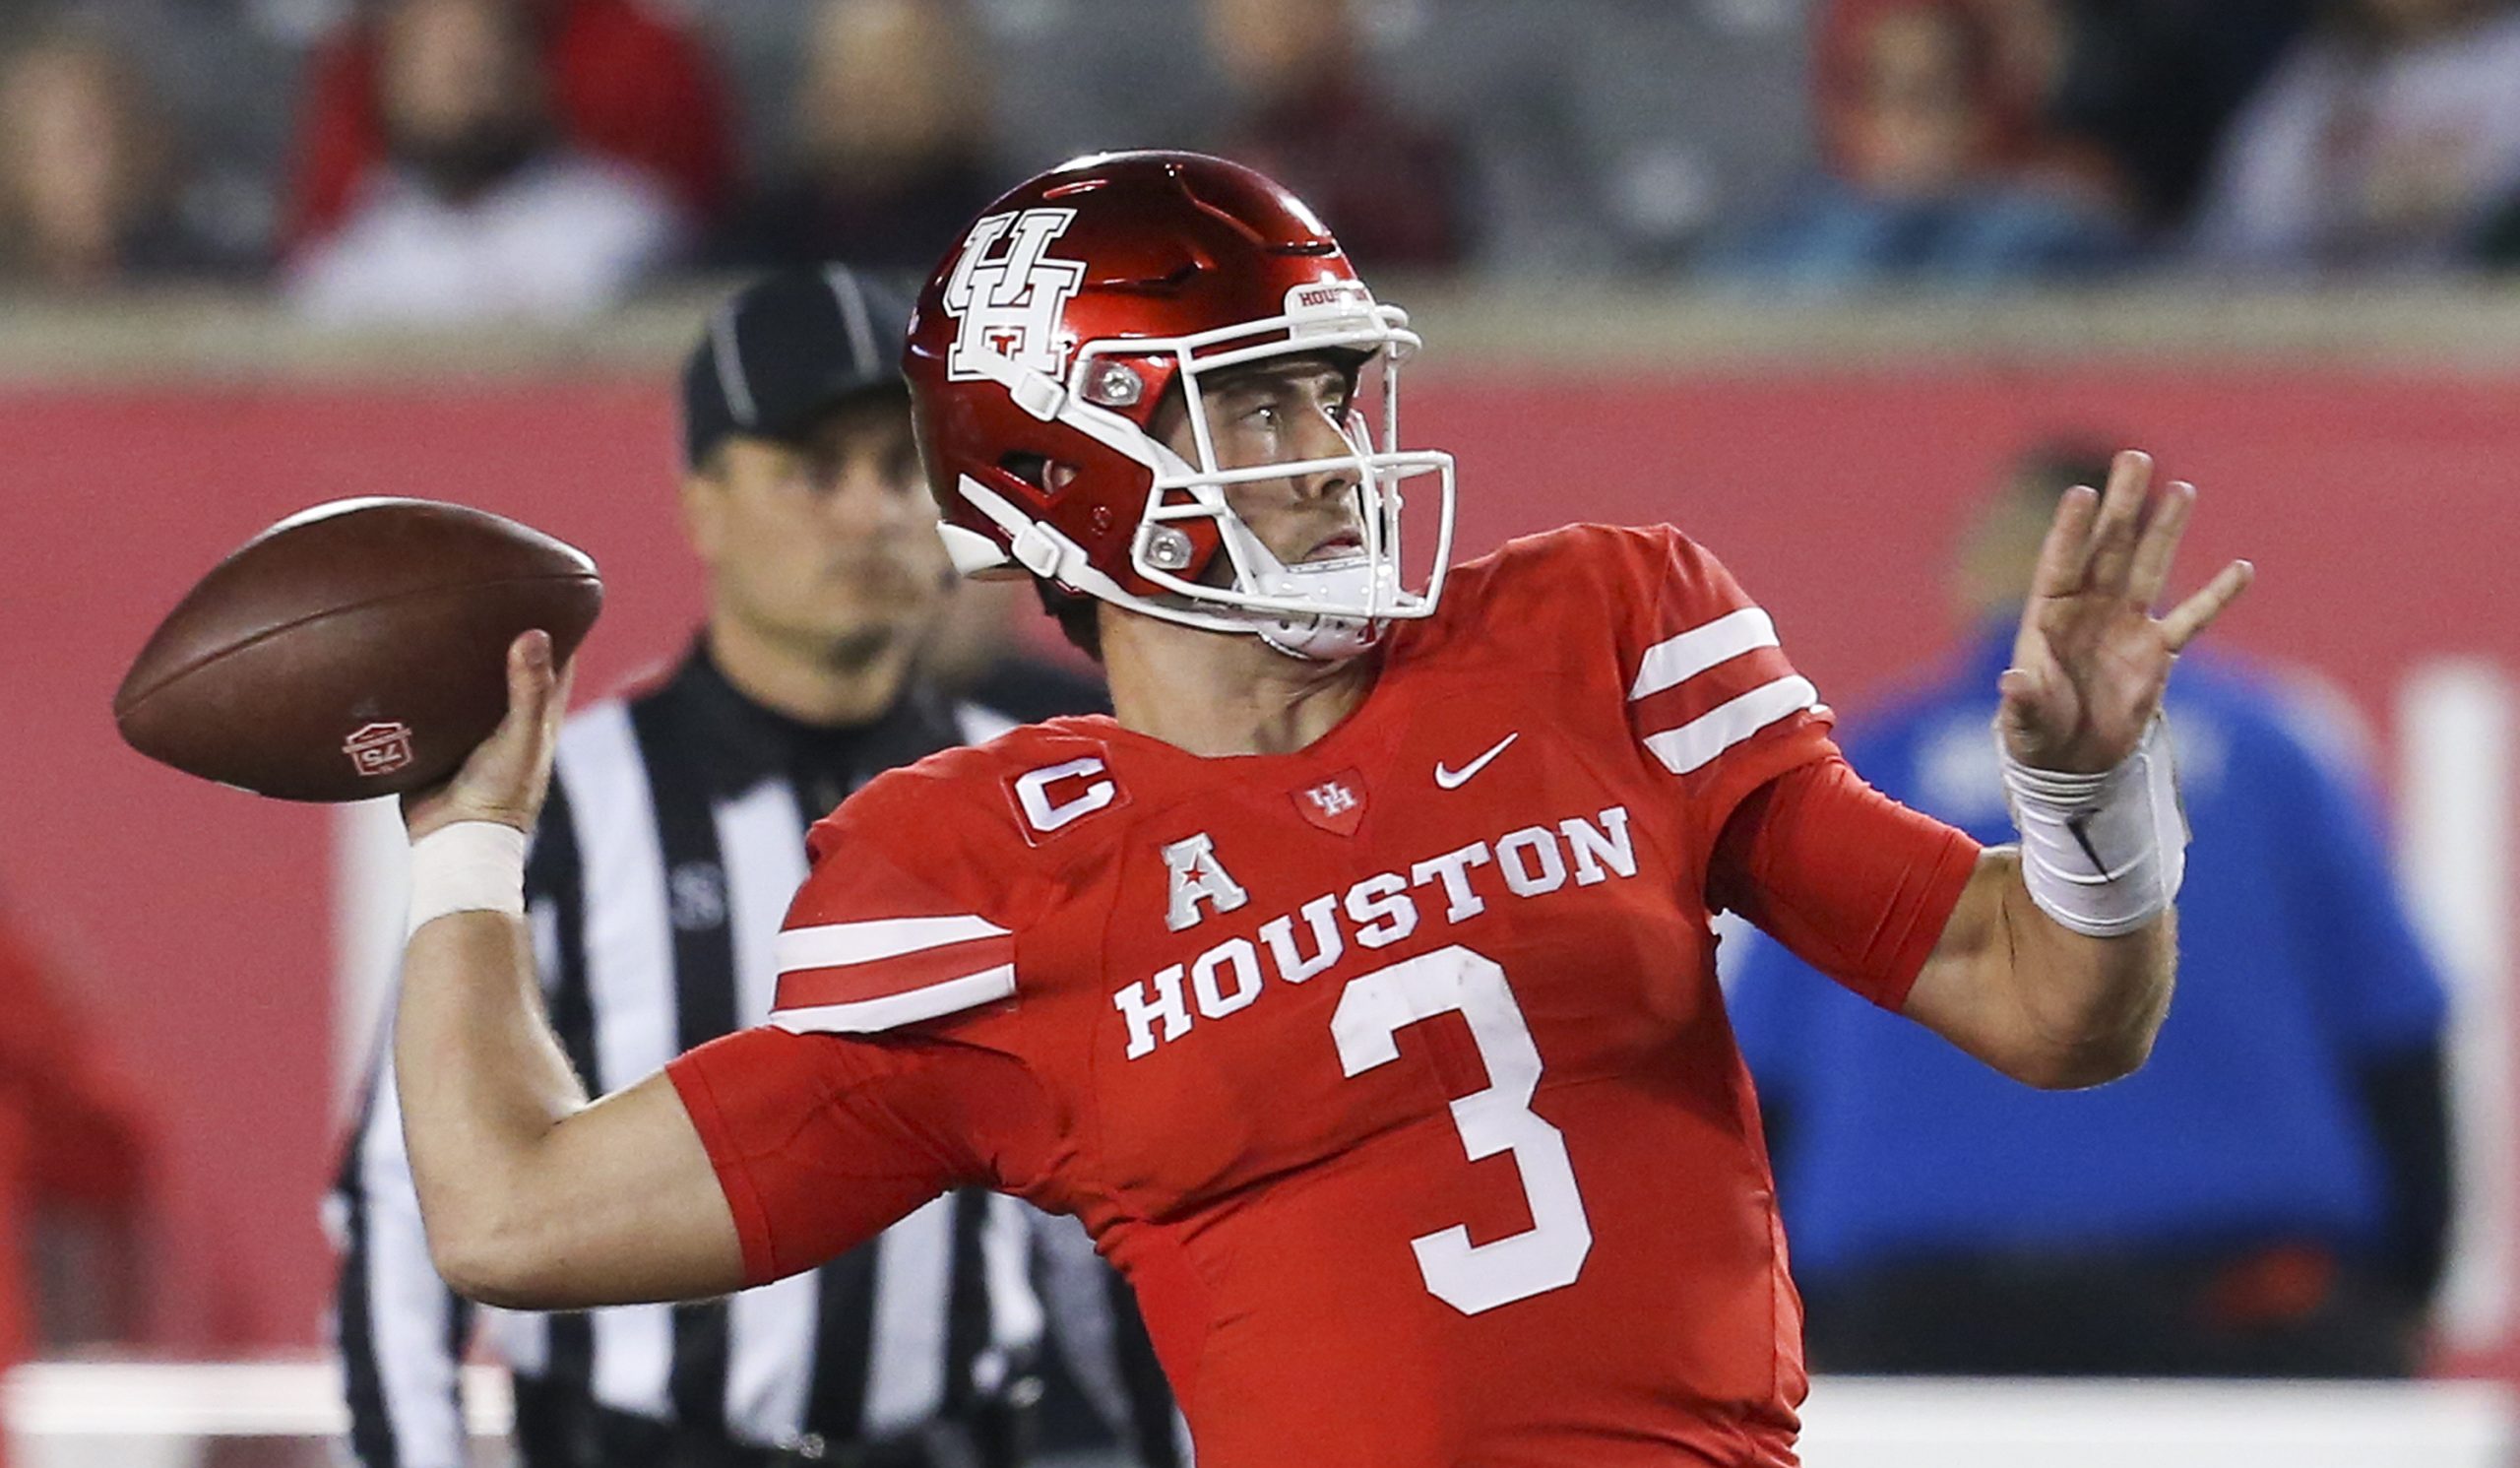 Quarterback Clayton Tune scored the winning two-point conversion for Houston in Saturday's classic against UTSA